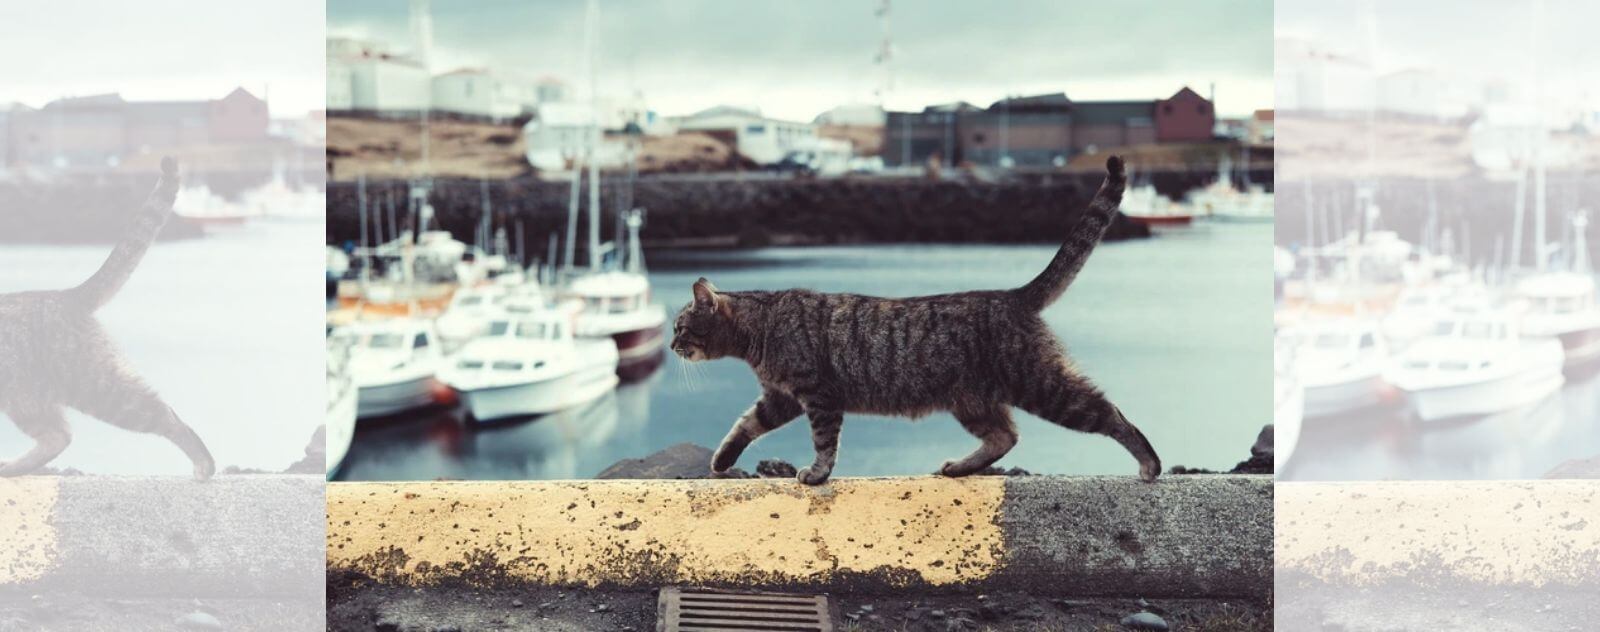 Cat Balancing on a Wall in a Port by the Sea Coast with Boats